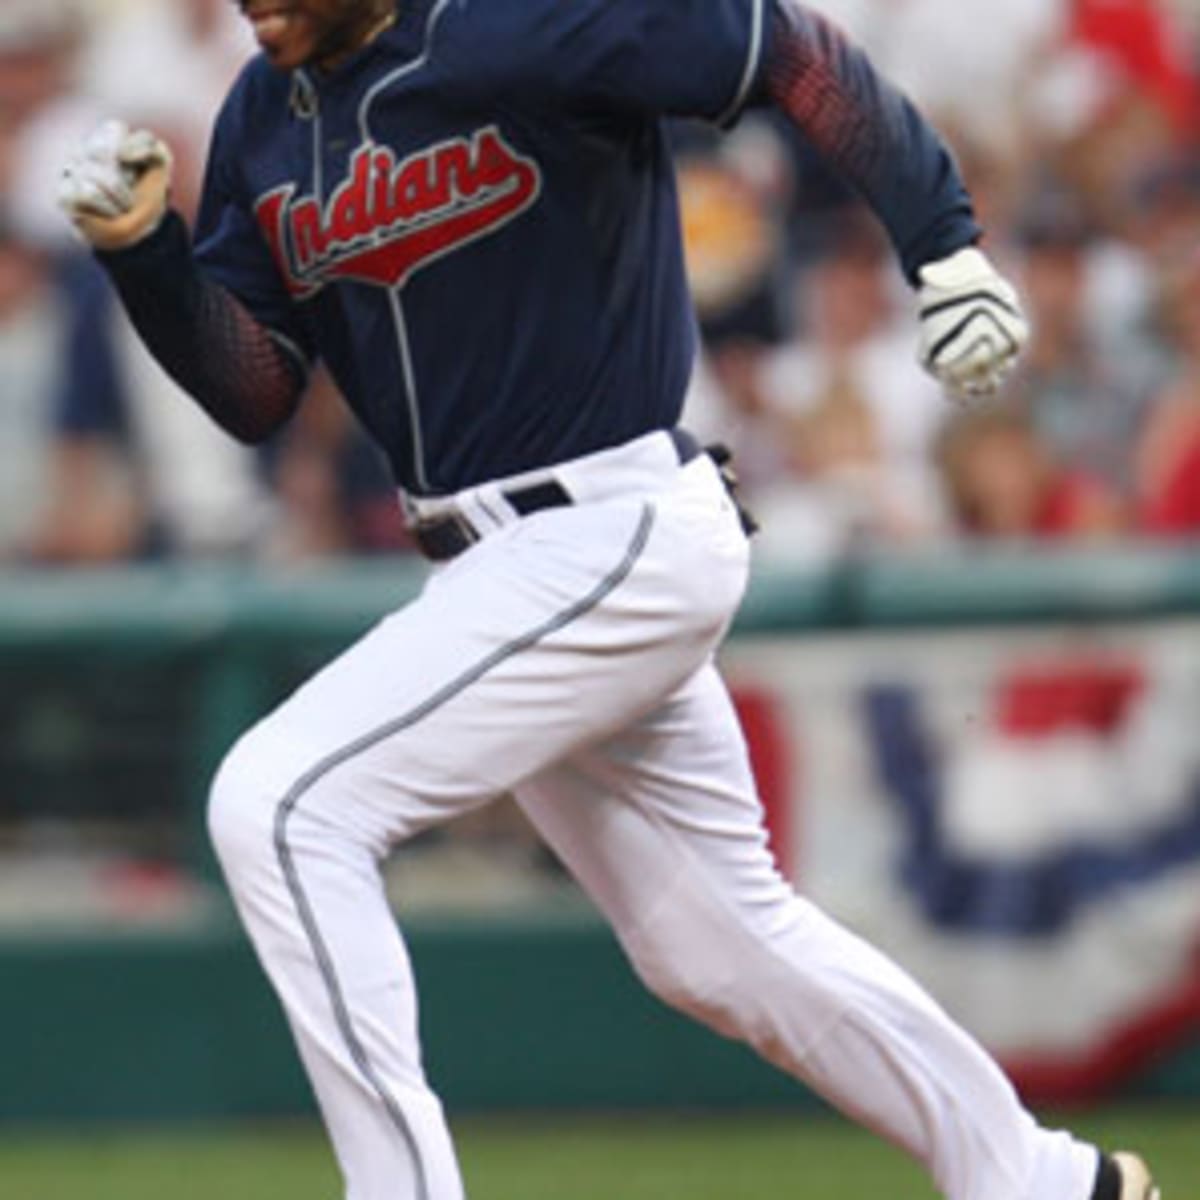 Will Cleveland Indians great Kenny Lofton get another call from